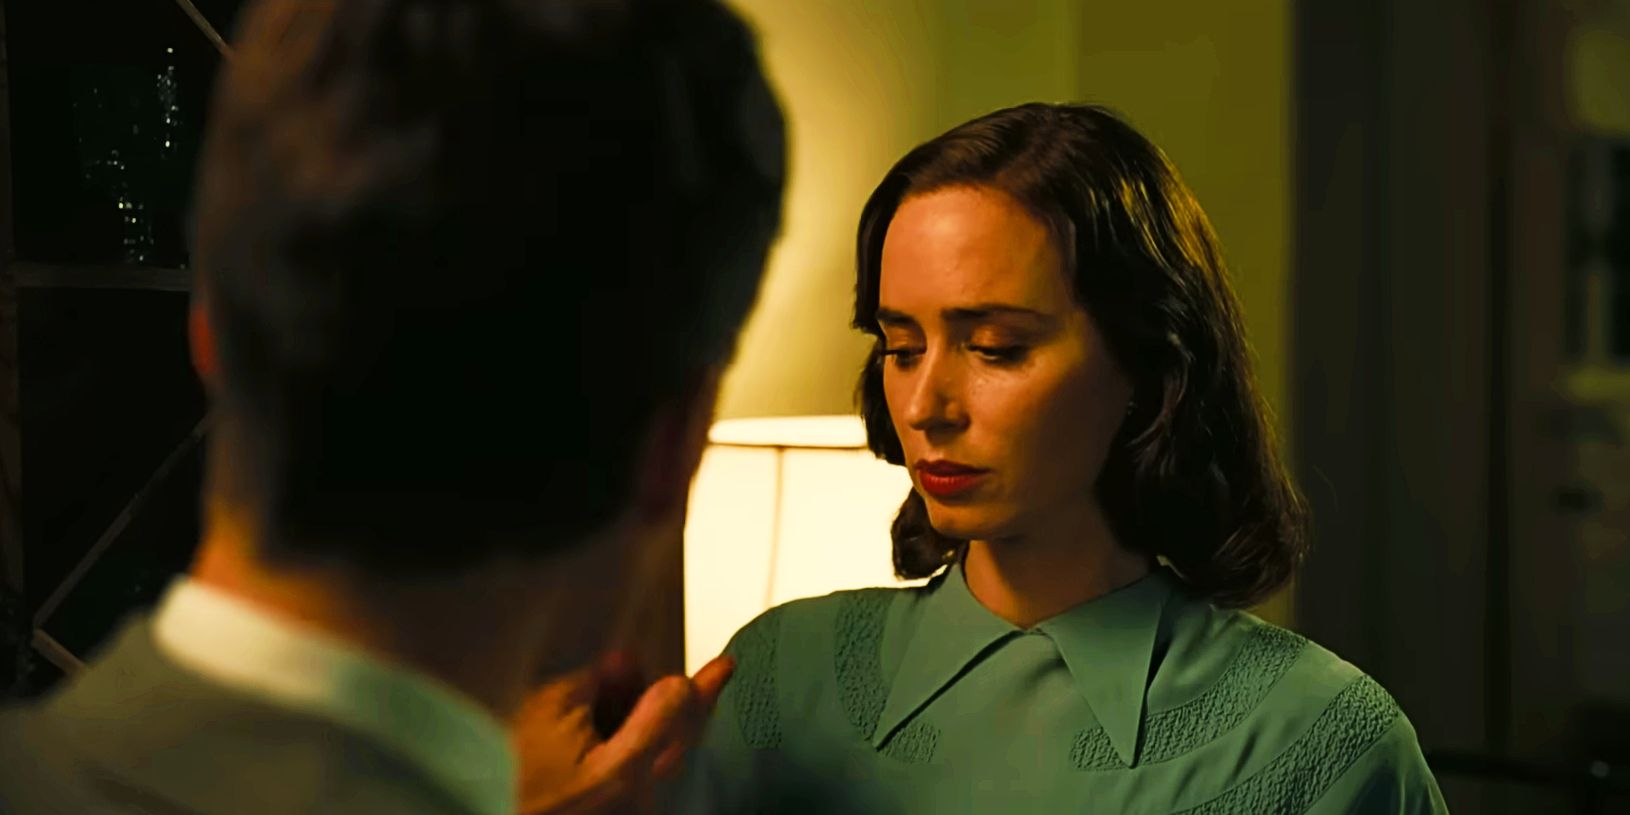 Cillian Murphy and Emily Blunt touch hands in Oppenheimer